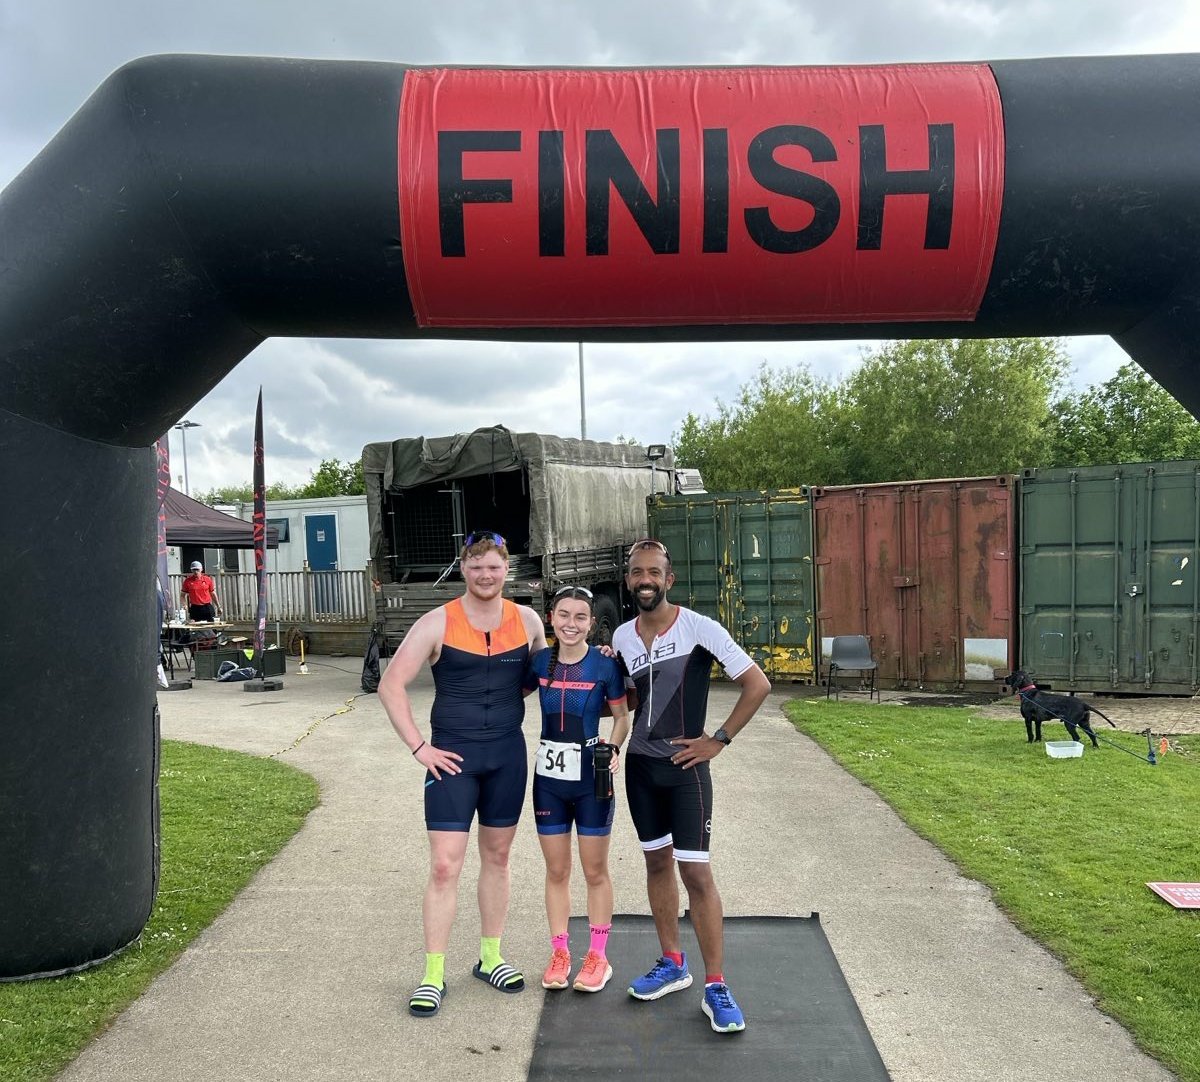 #PushYourself 

For the first time, 2 of #MSUOTC's OCdts and 1 of our staff competed in the UK North Army Triathlon!

Some good times for the first event of the season, they're looking forward to the next event 💪

#AStudentLifeLessOrdinary #BeMoreThanYourDegree